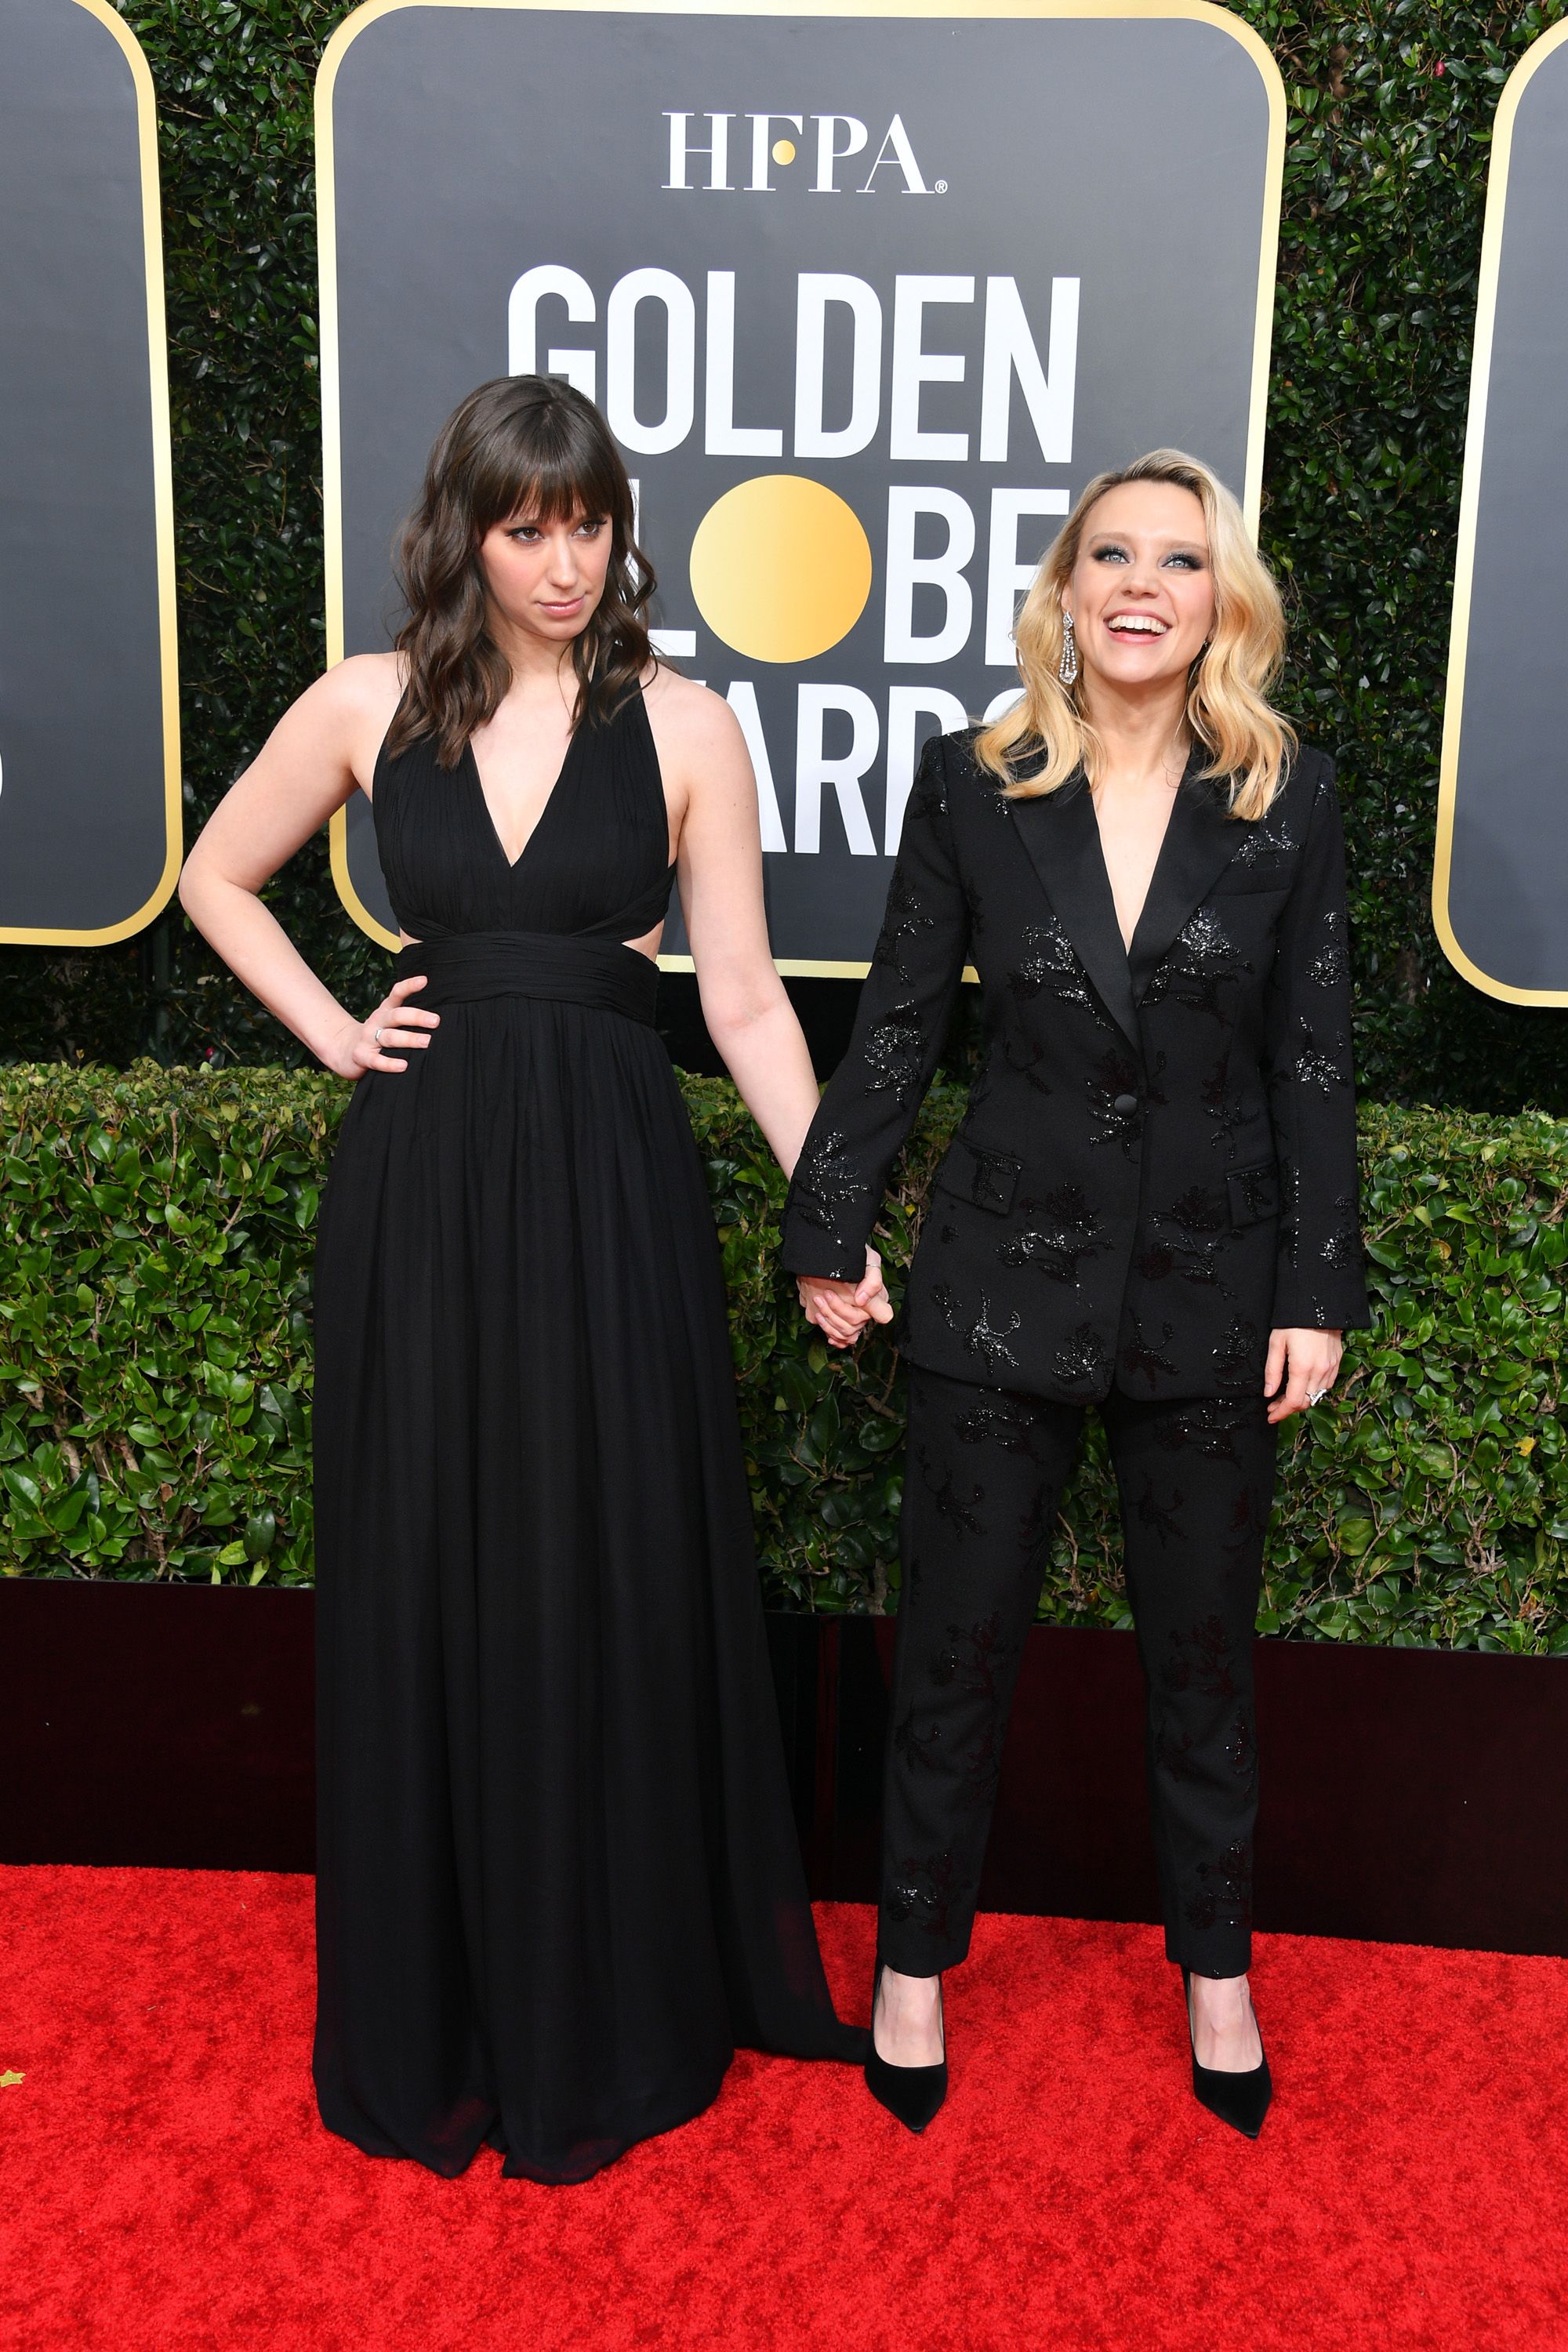 Kate McKinnon and sister Emily Lynne Berthold at the 77th Annual Golden Globe Awards in January 2020 in Beverly Hills | Source: Getty Images